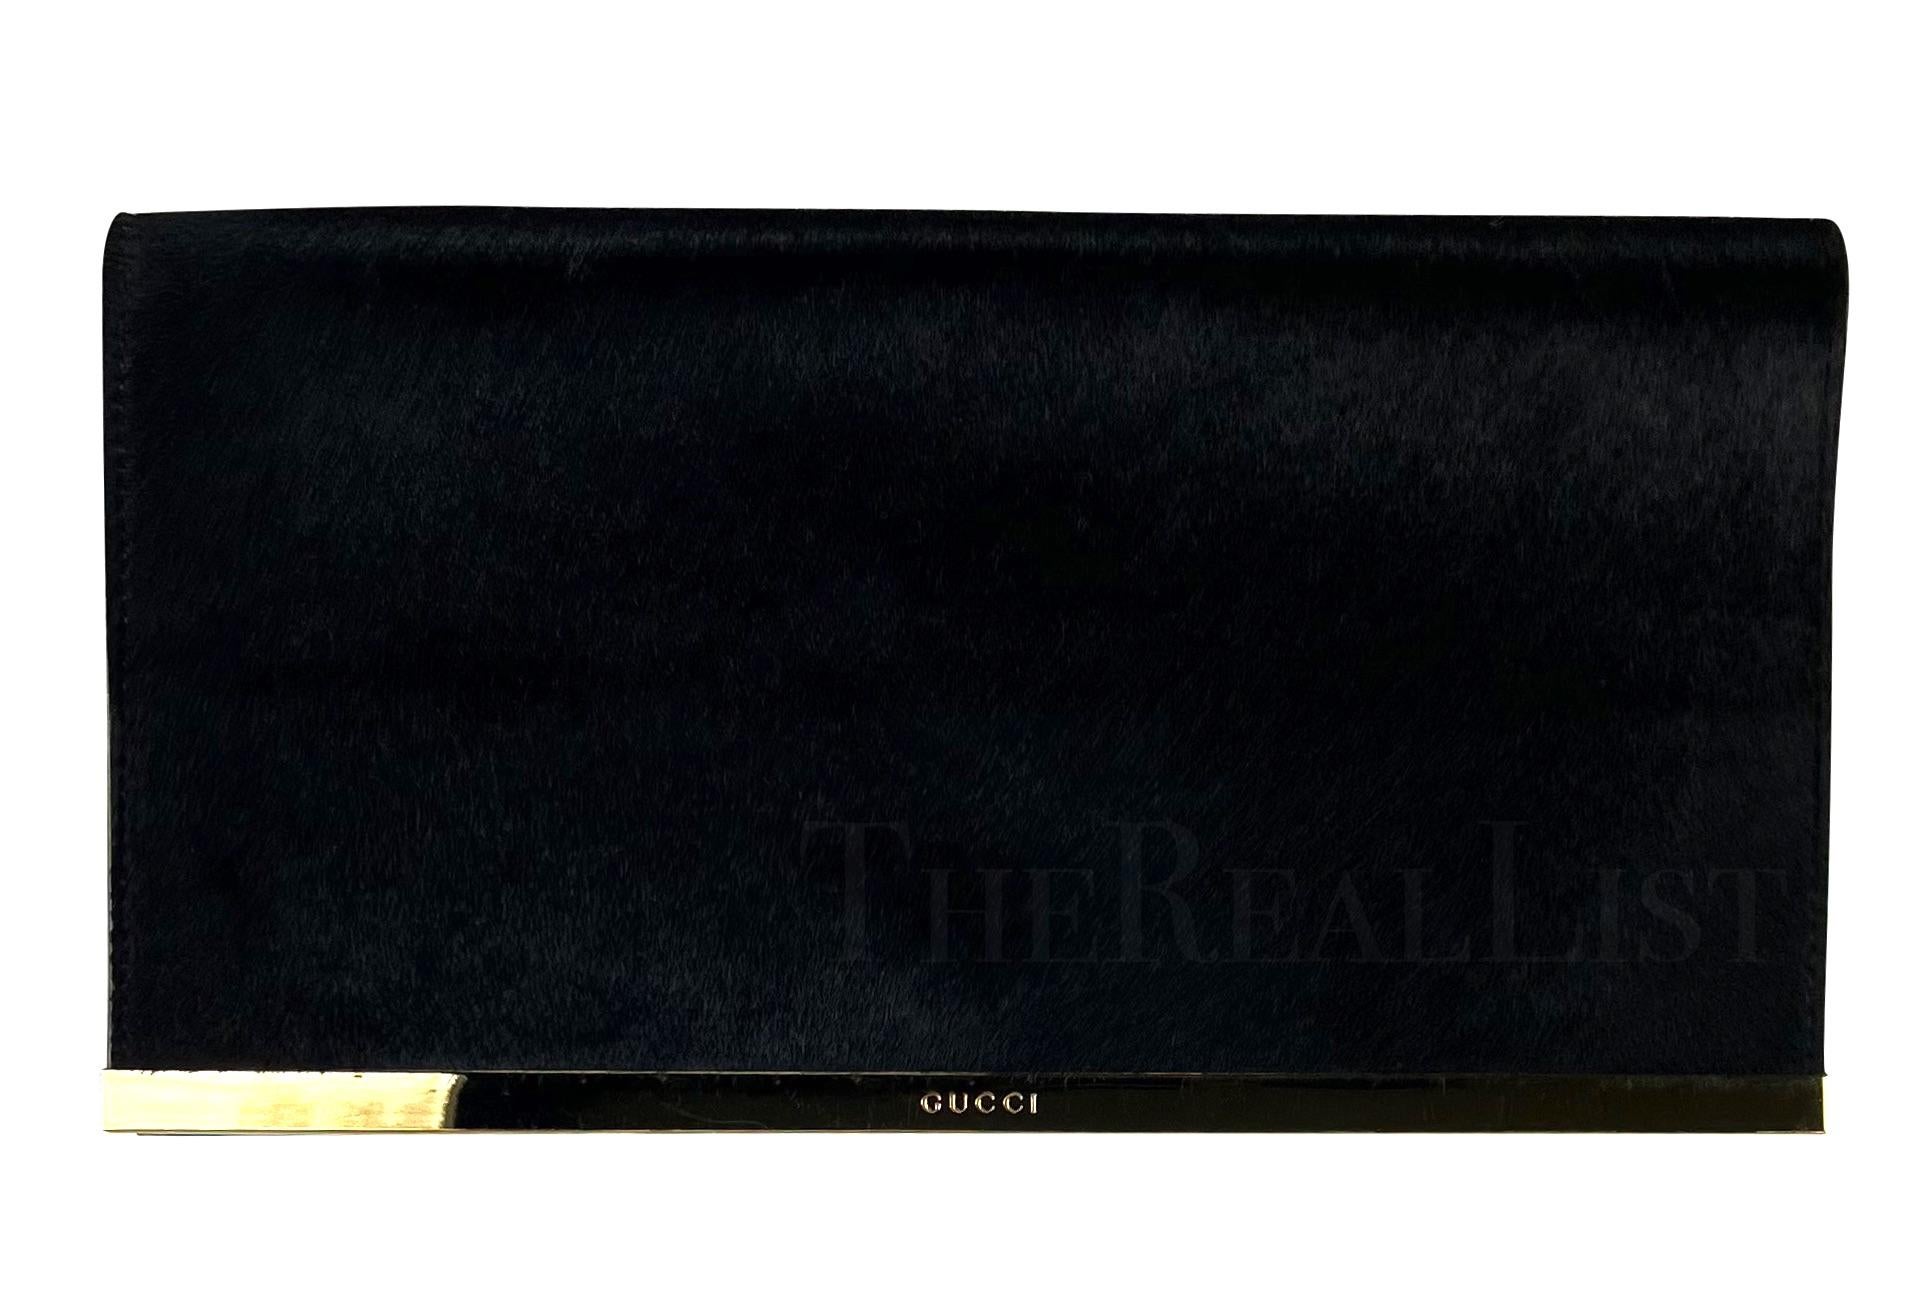 Presenting a chic black Gucci pony hair clutch, designed by Tom Ford. From the Fall/Winter 1996 collection, this clutch is constructed entirely from black pony hair and punctuated with a delicate gold-tone metal accent. This piece of quiet luxury